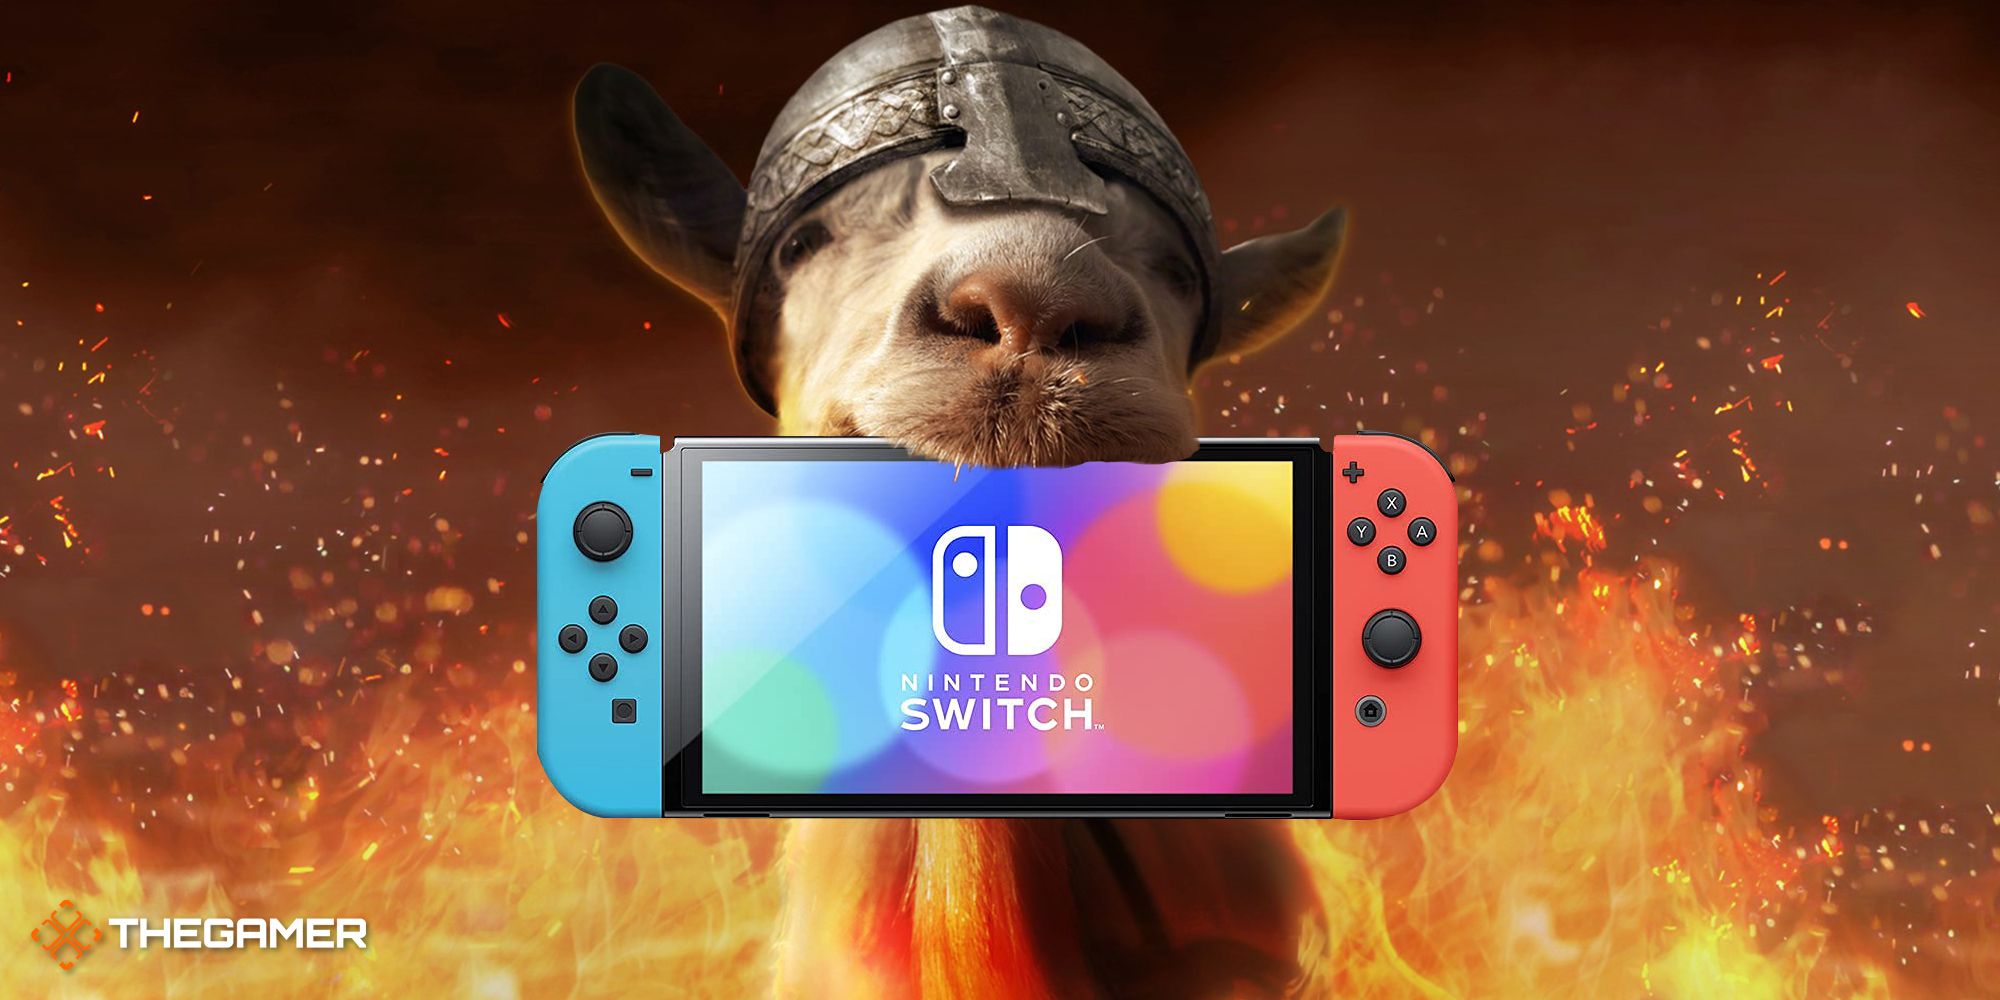 A goat from Goat Simulator holding a Nintendo Switch